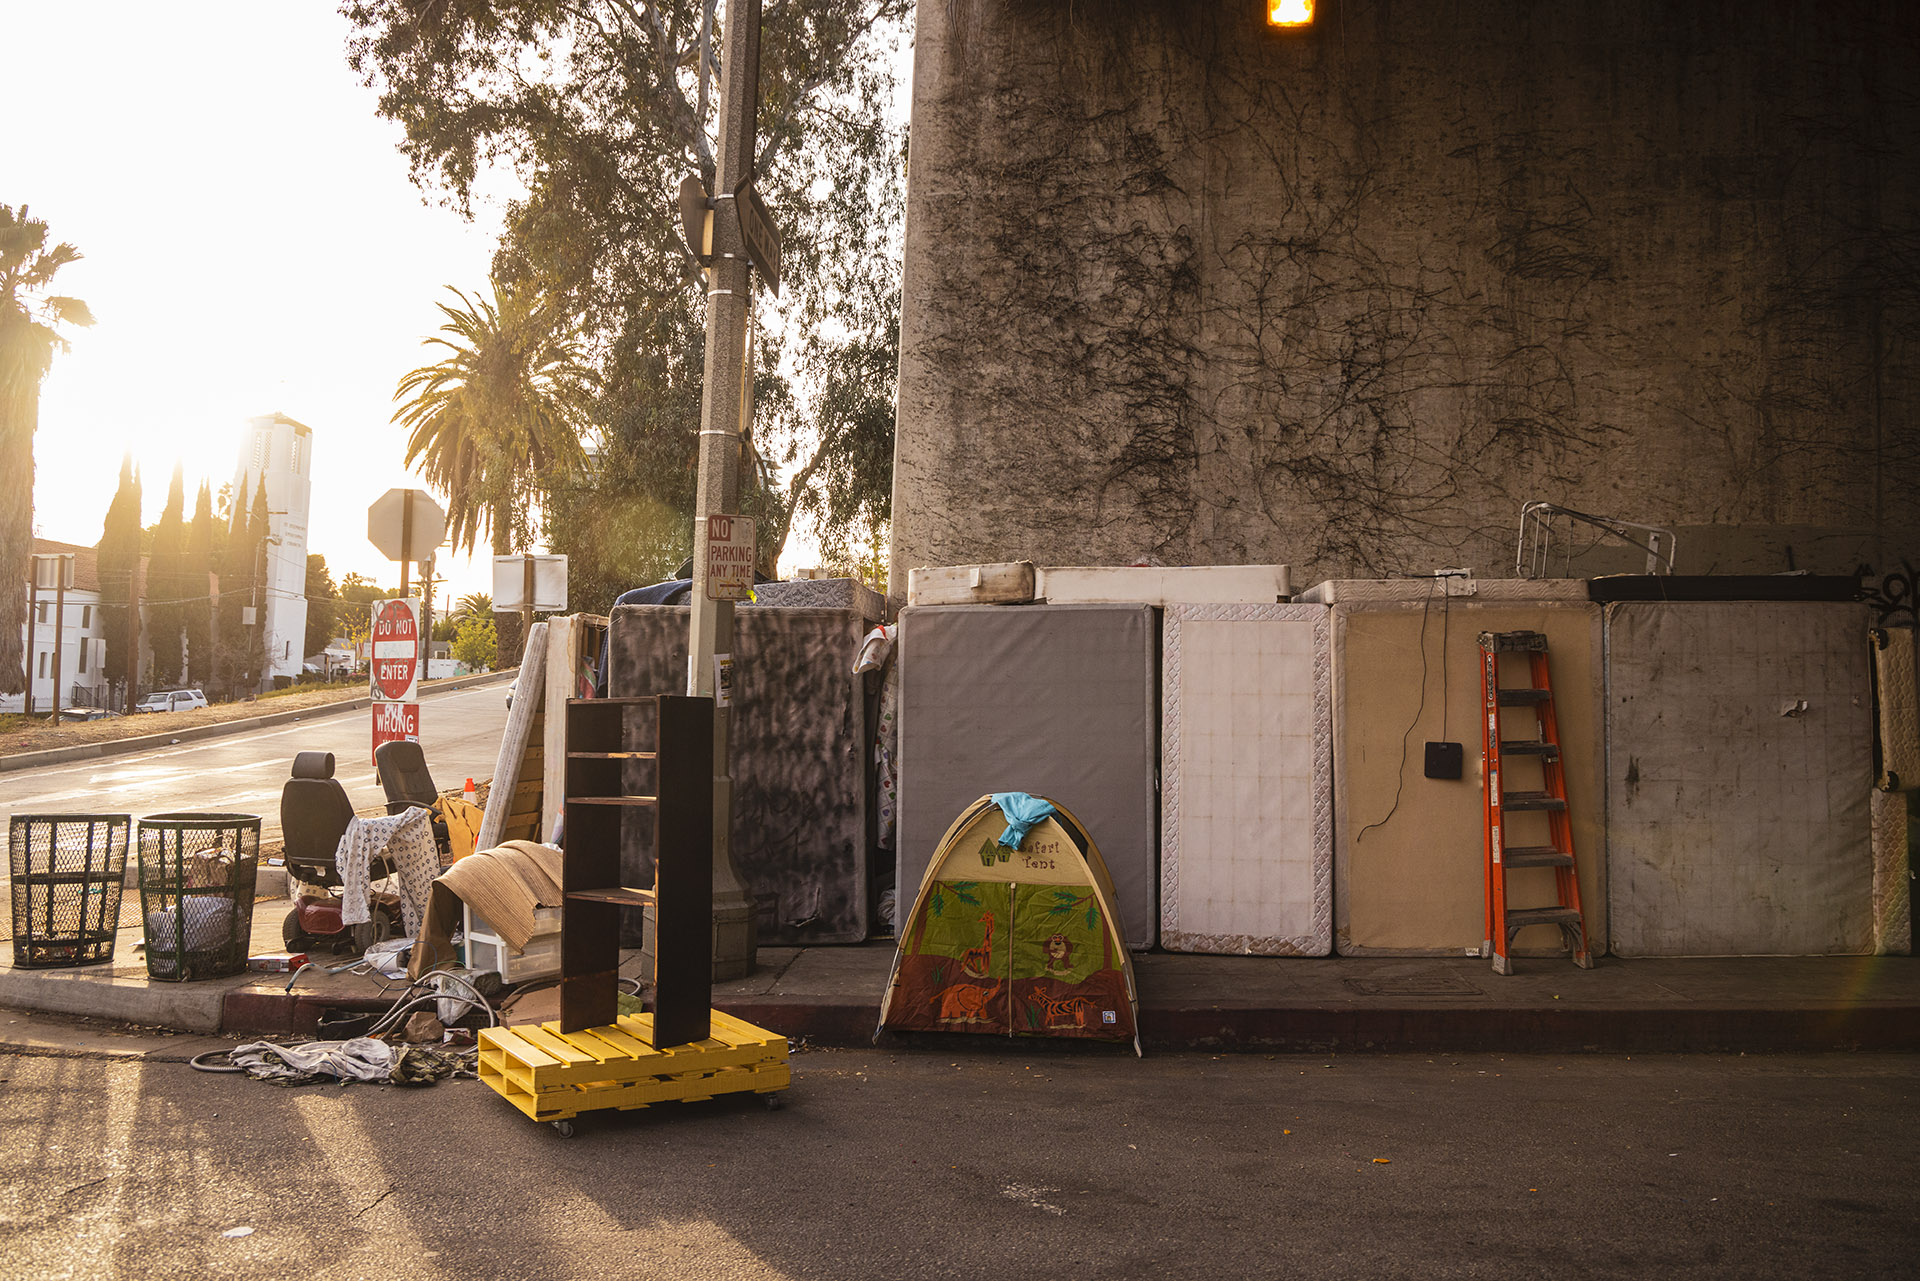 Hollywood, under the bridge. Homeless situation became very complicated